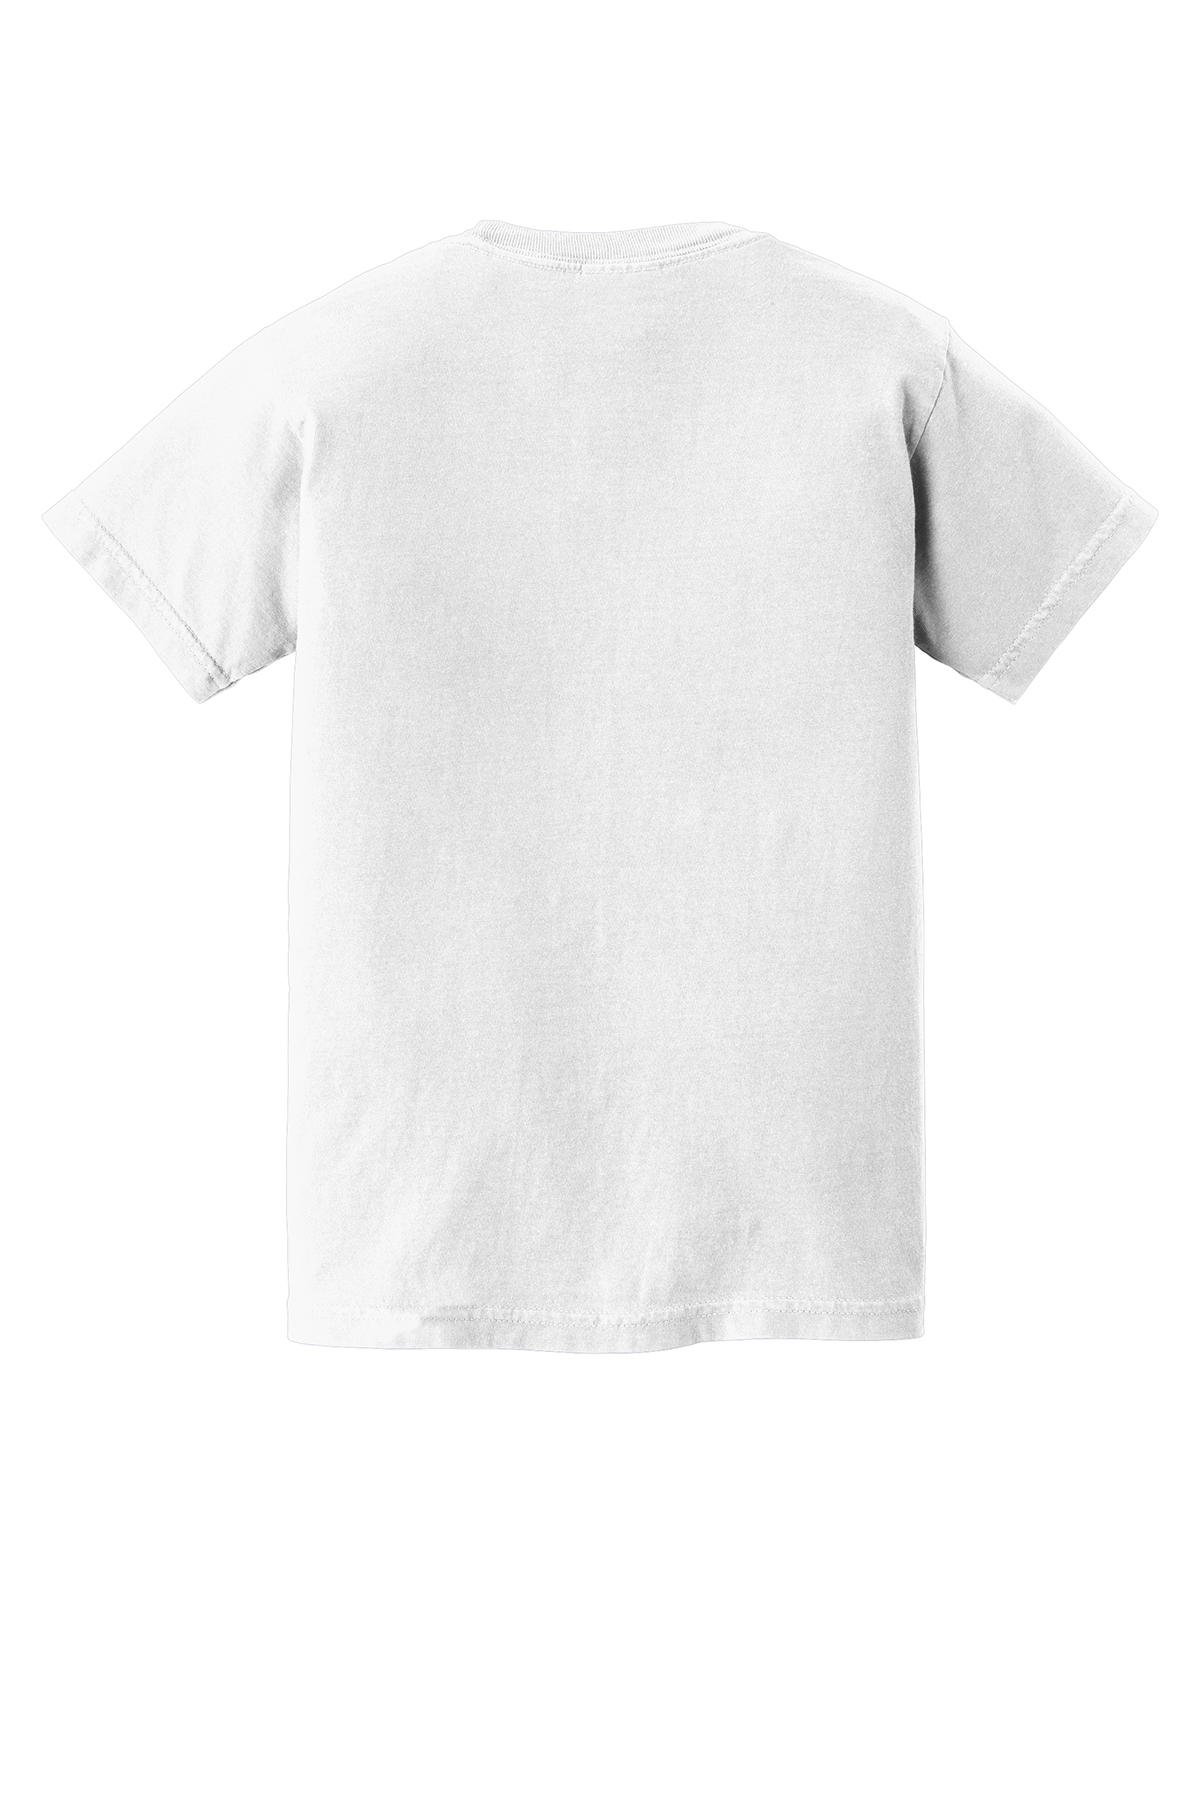 Comfort Colors Youth Heavyweight Ring Spun Tee | Product | SanMar